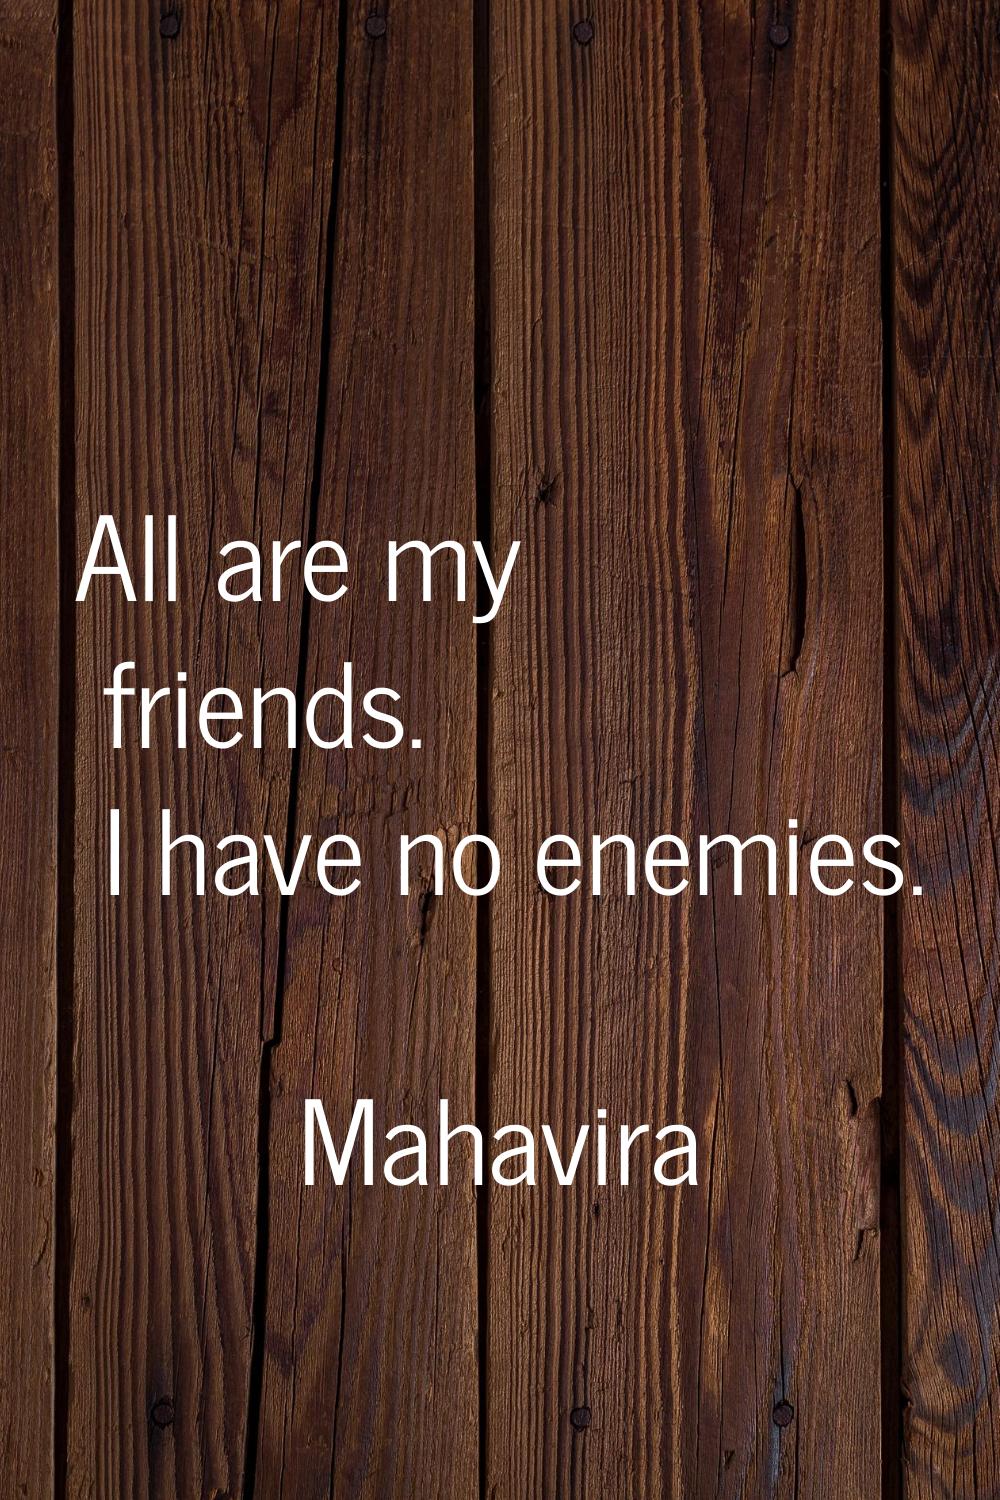 All are my friends. I have no enemies.